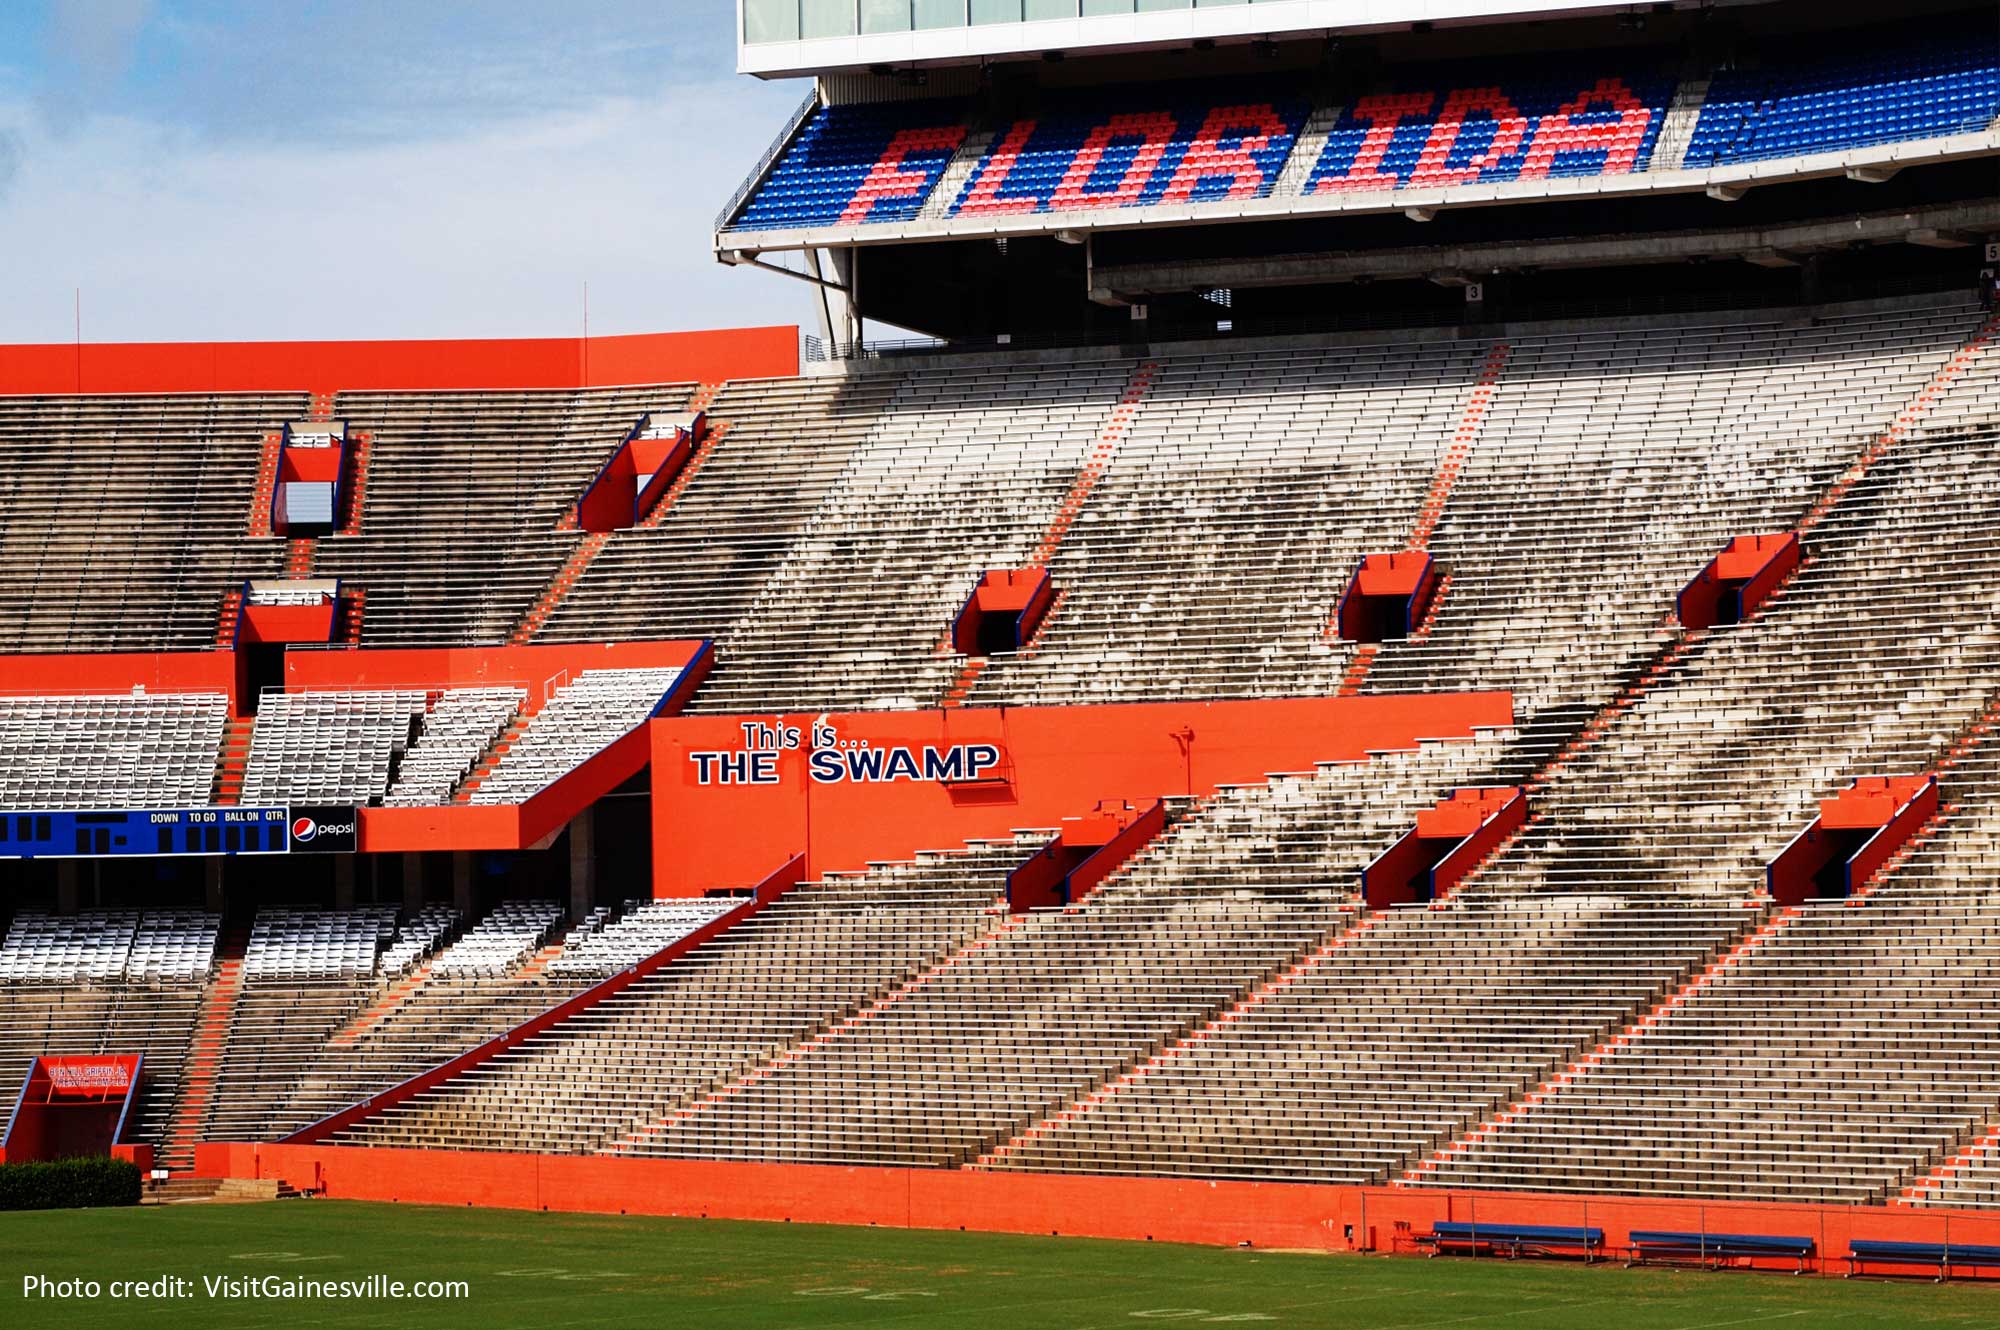 Less than 1 mile from The Swamp, UF's Ben H. Griffin Stadium, home of Florida Gators football